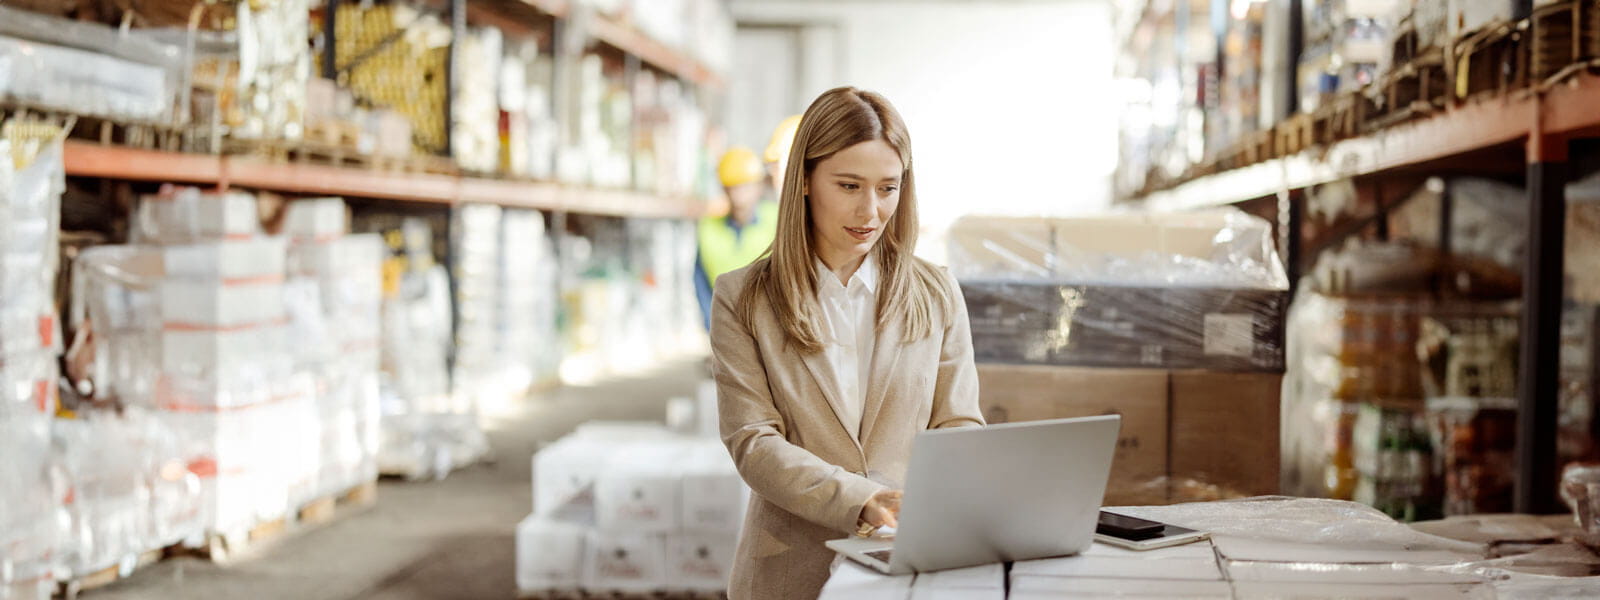 female in a business suite working in a warehouse looking at inventory on her computer